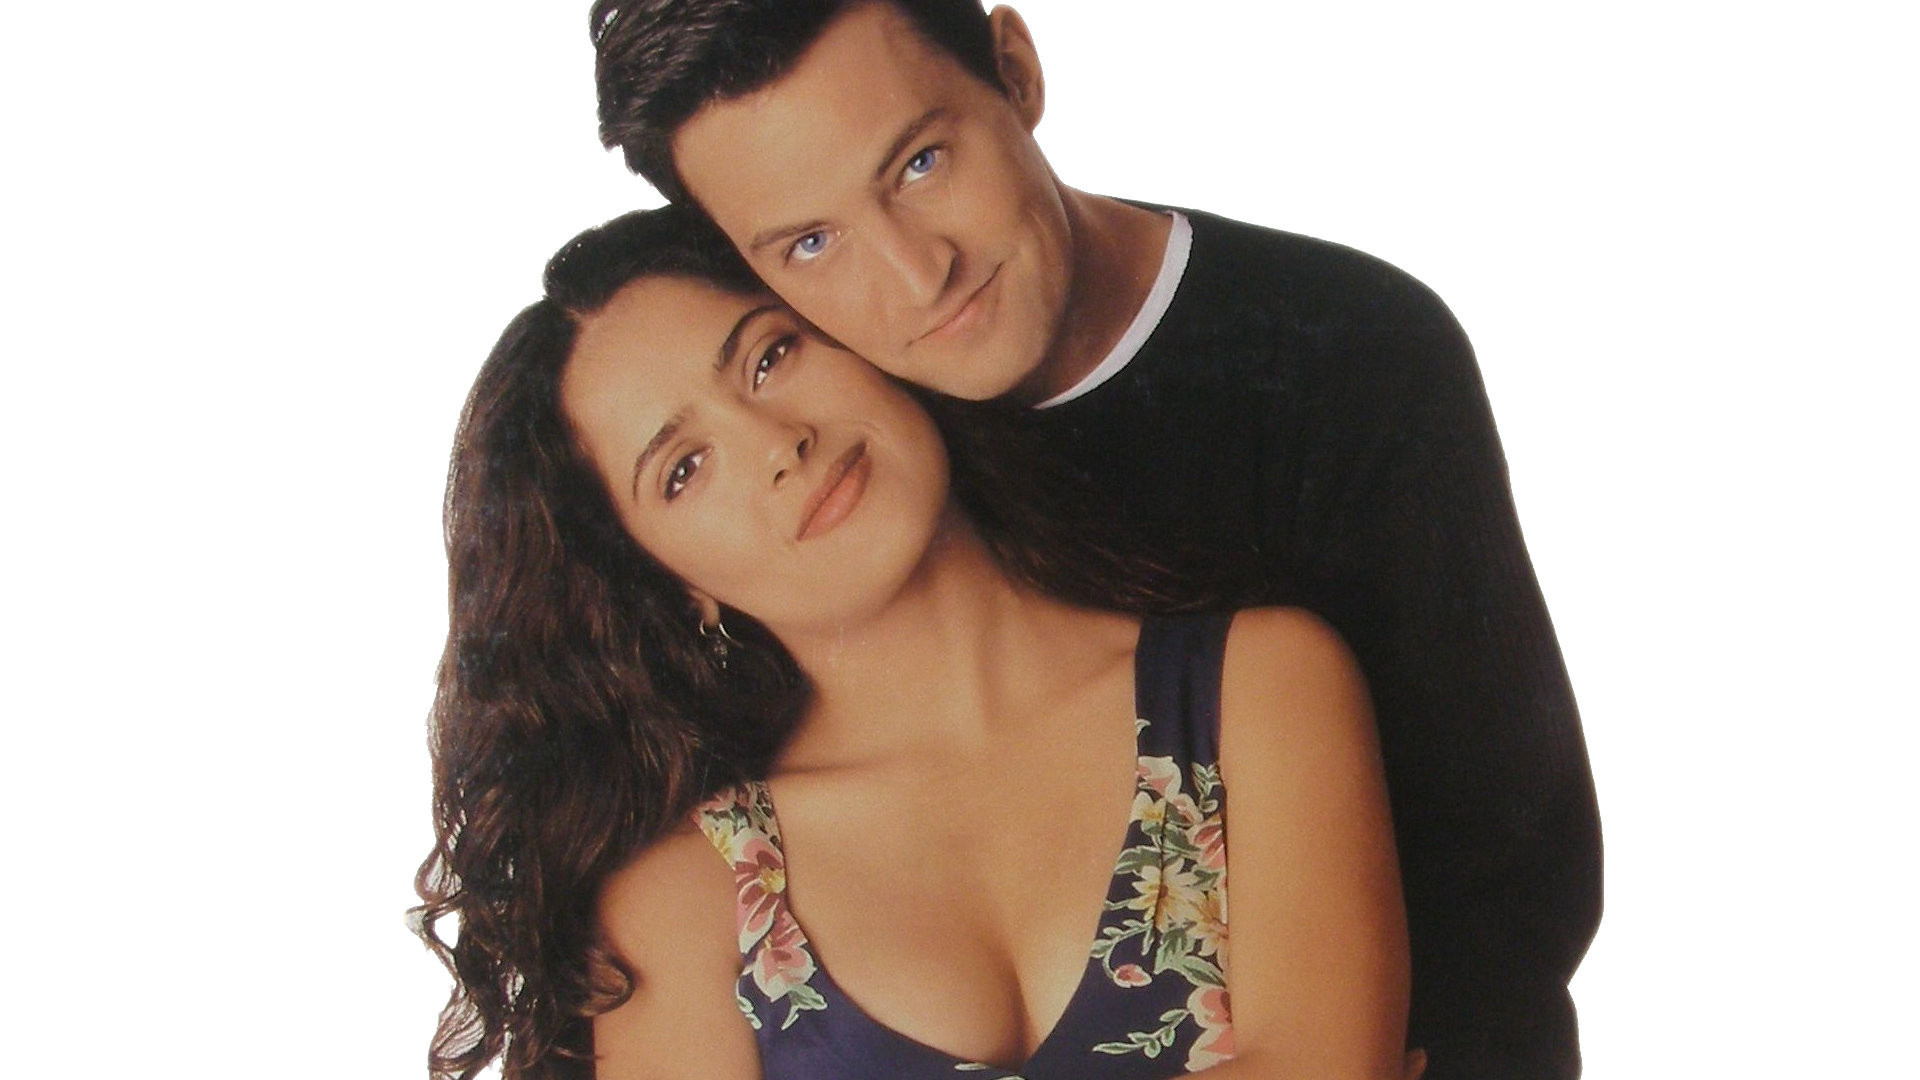 Fools Rush In (Movie): The fictional couple played by famous actors, Matthew Perry, Salma Hayek. 1920x1080 Full HD Background.